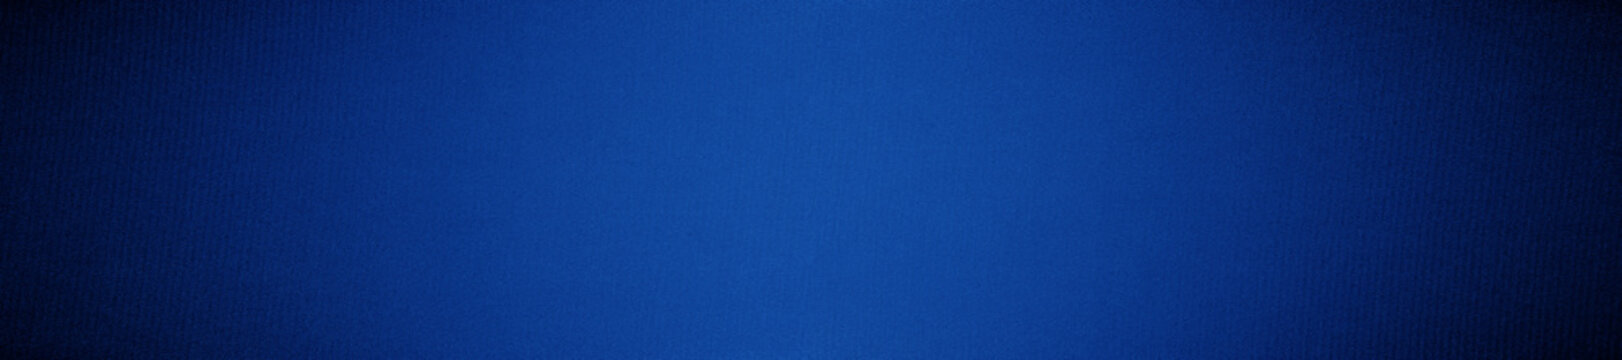 Dark blue background with a light spot. Gradient. Deep blue background with space for design. Web banner. Wide. Panoramic. Website header.